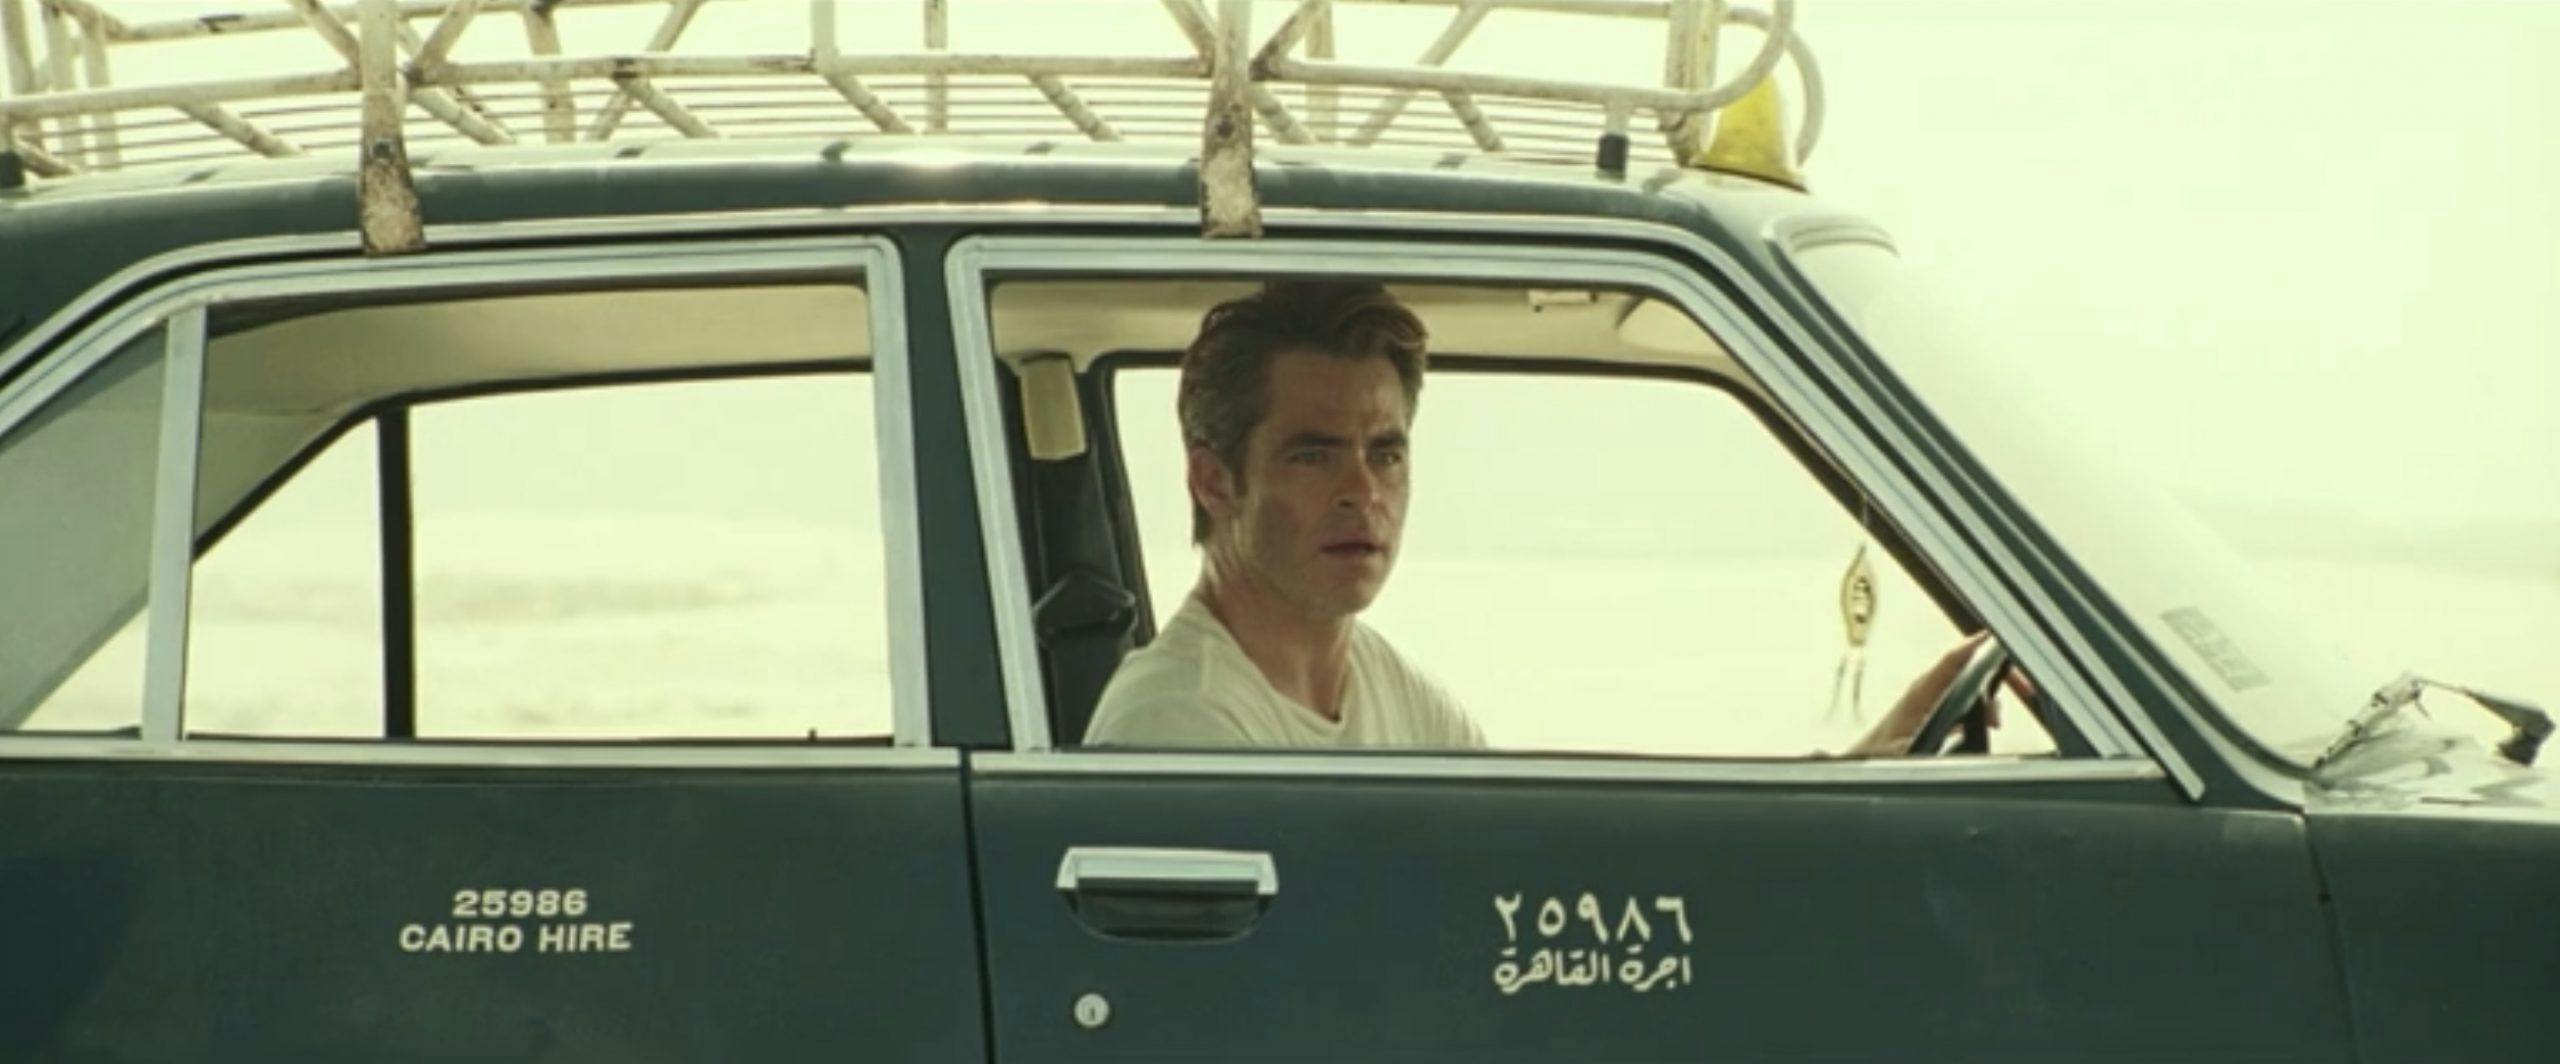 chris pine taxi chase scene action